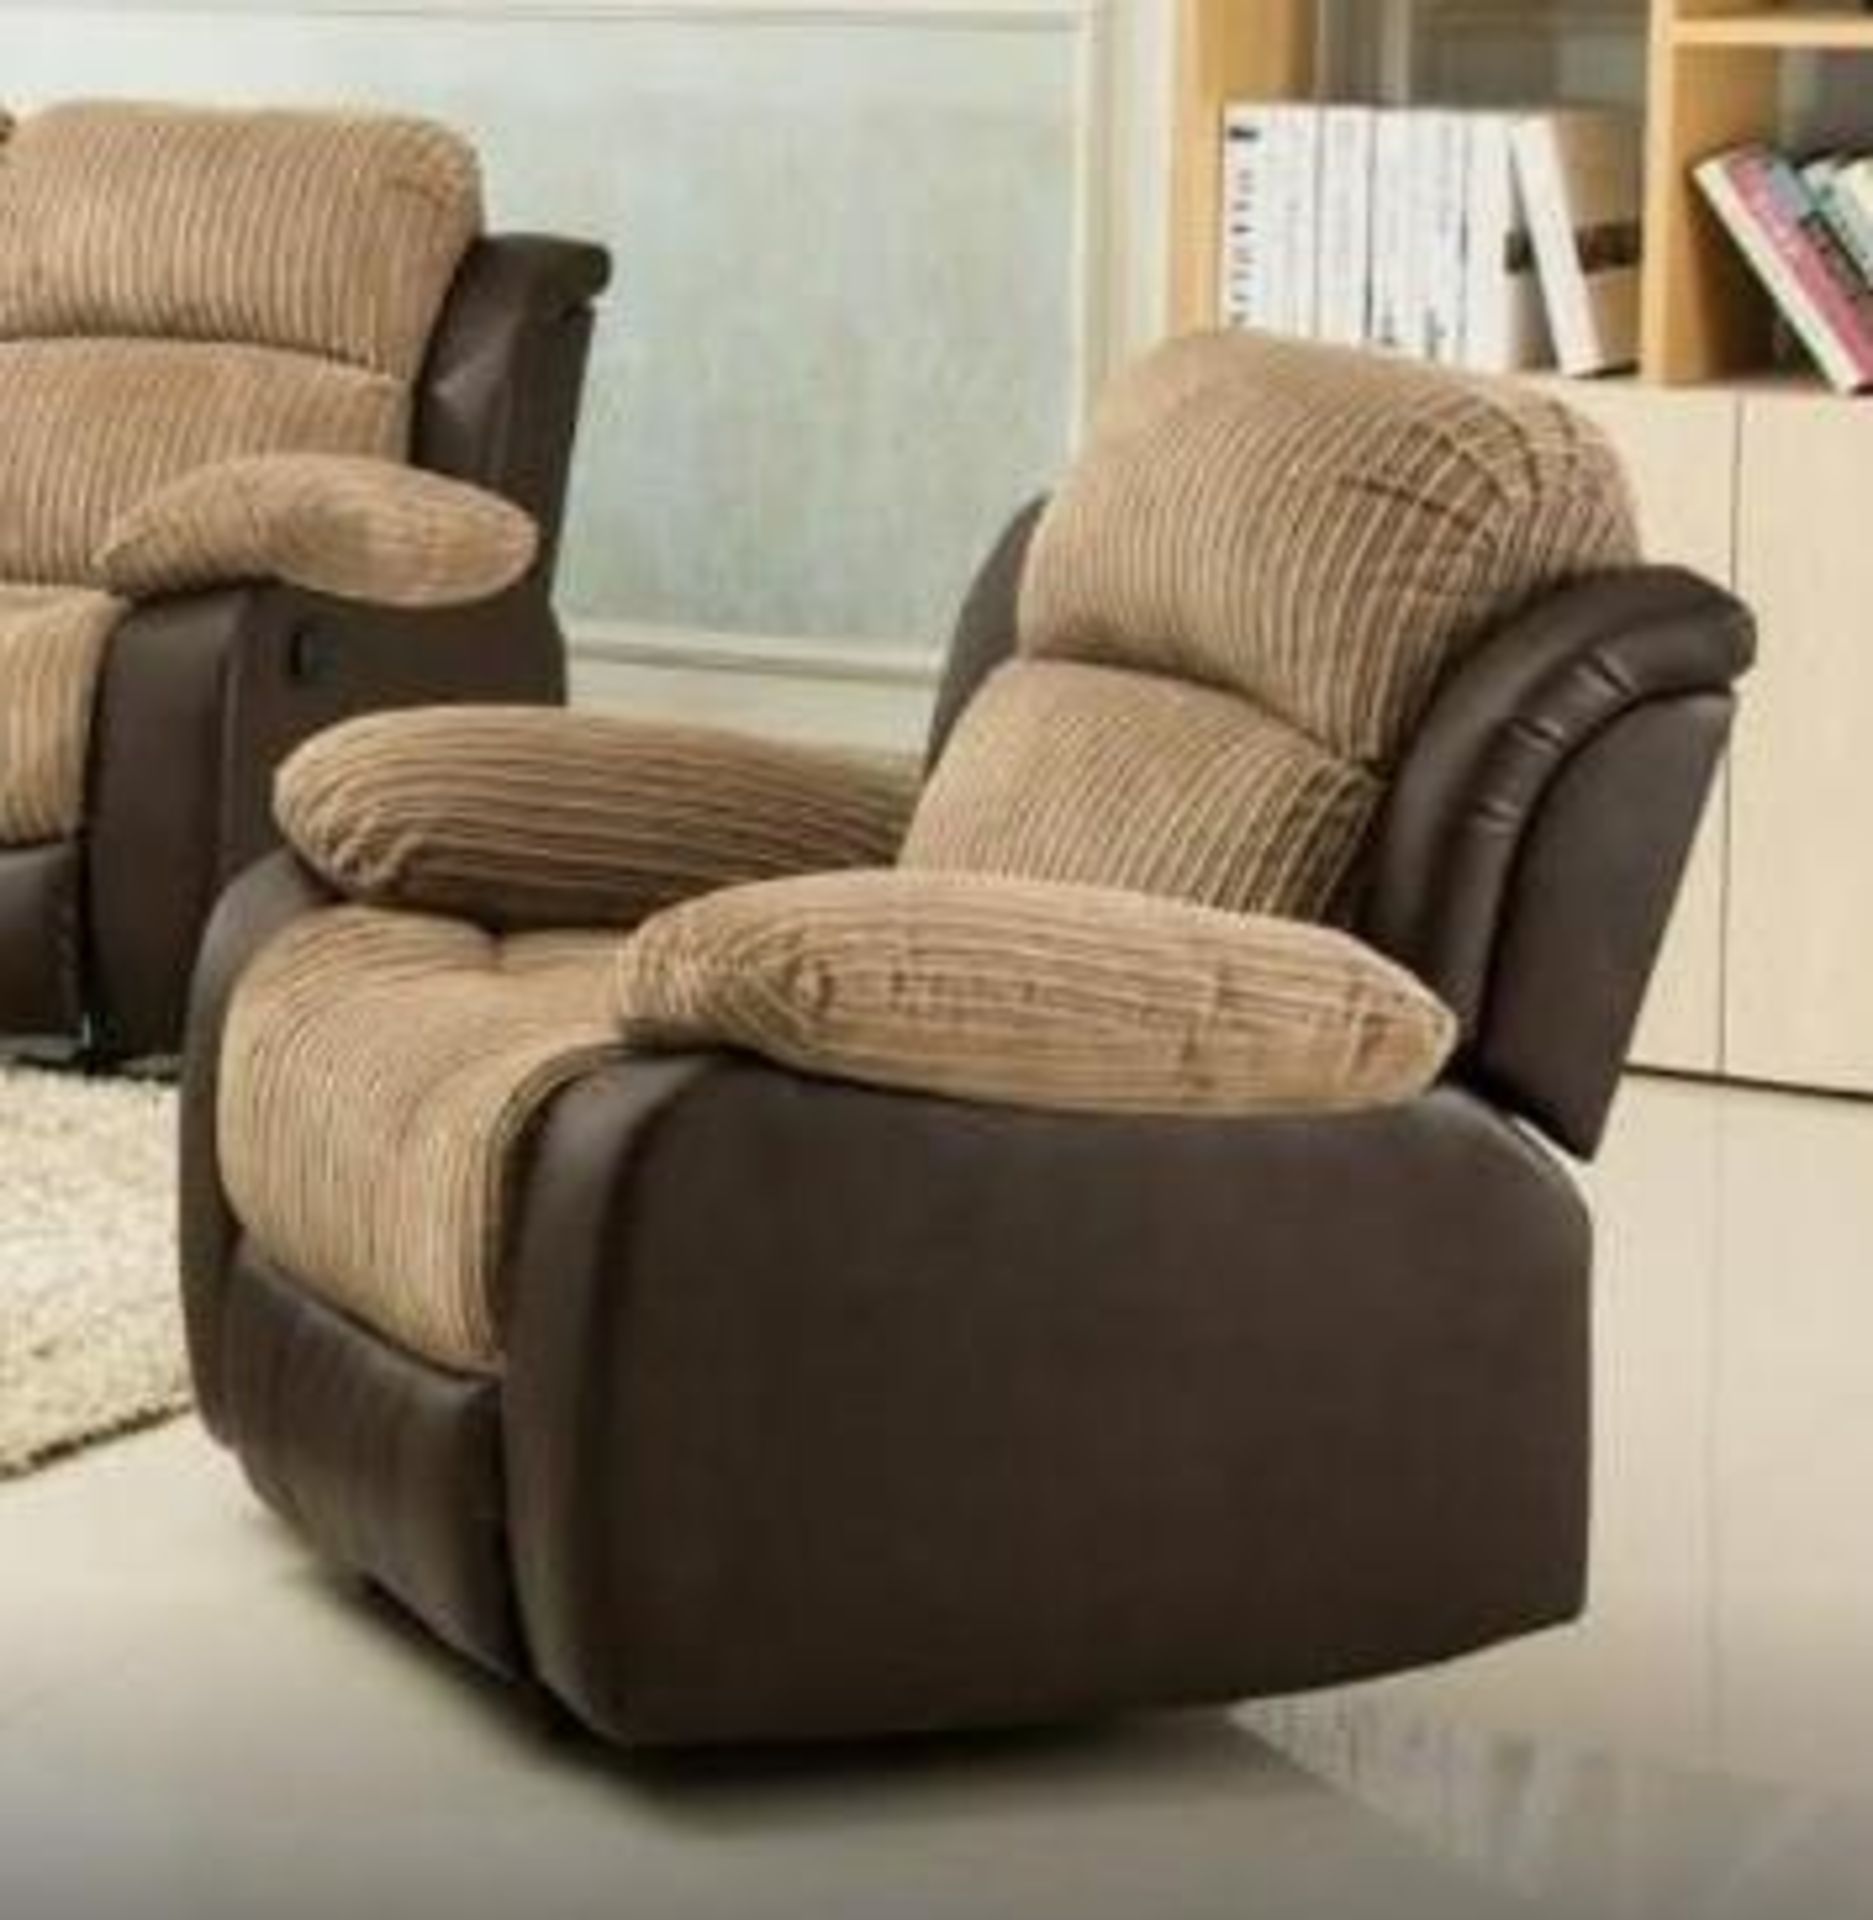 BRAND NEW & BOXED California 1 seater brown leather trim manual recliner Chair.